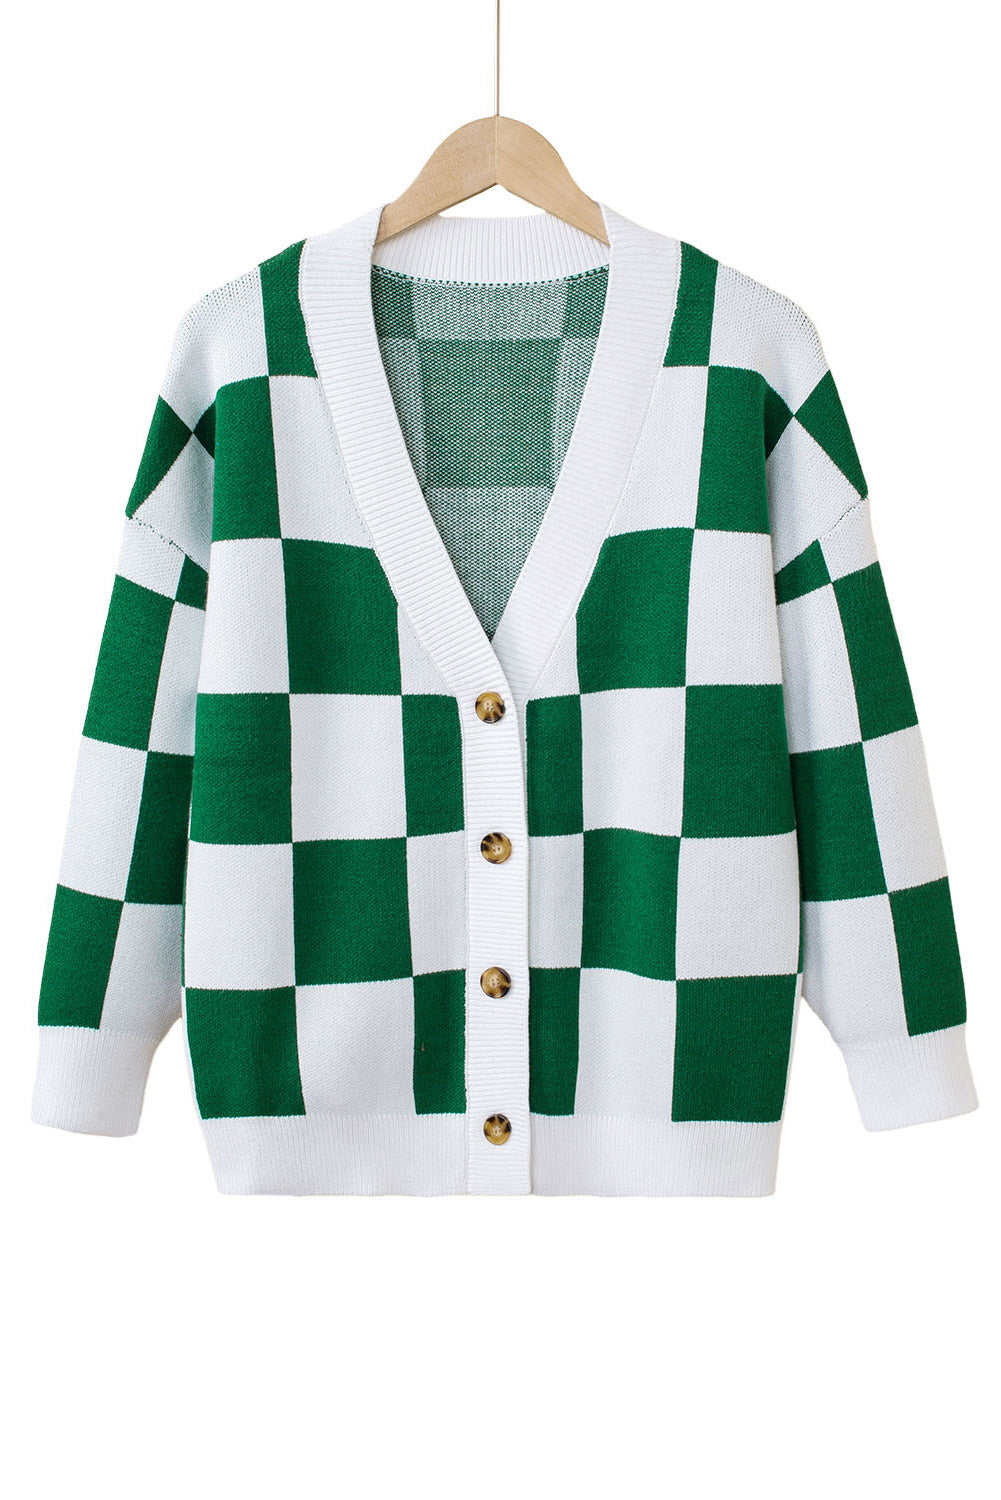 LC271943-9-S, LC271943-9-M, LC271943-9-L, LC271943-9-XL, LC271943-9-2XL, Green Contrast Checkered Print Button Up Sweater Cardigan 